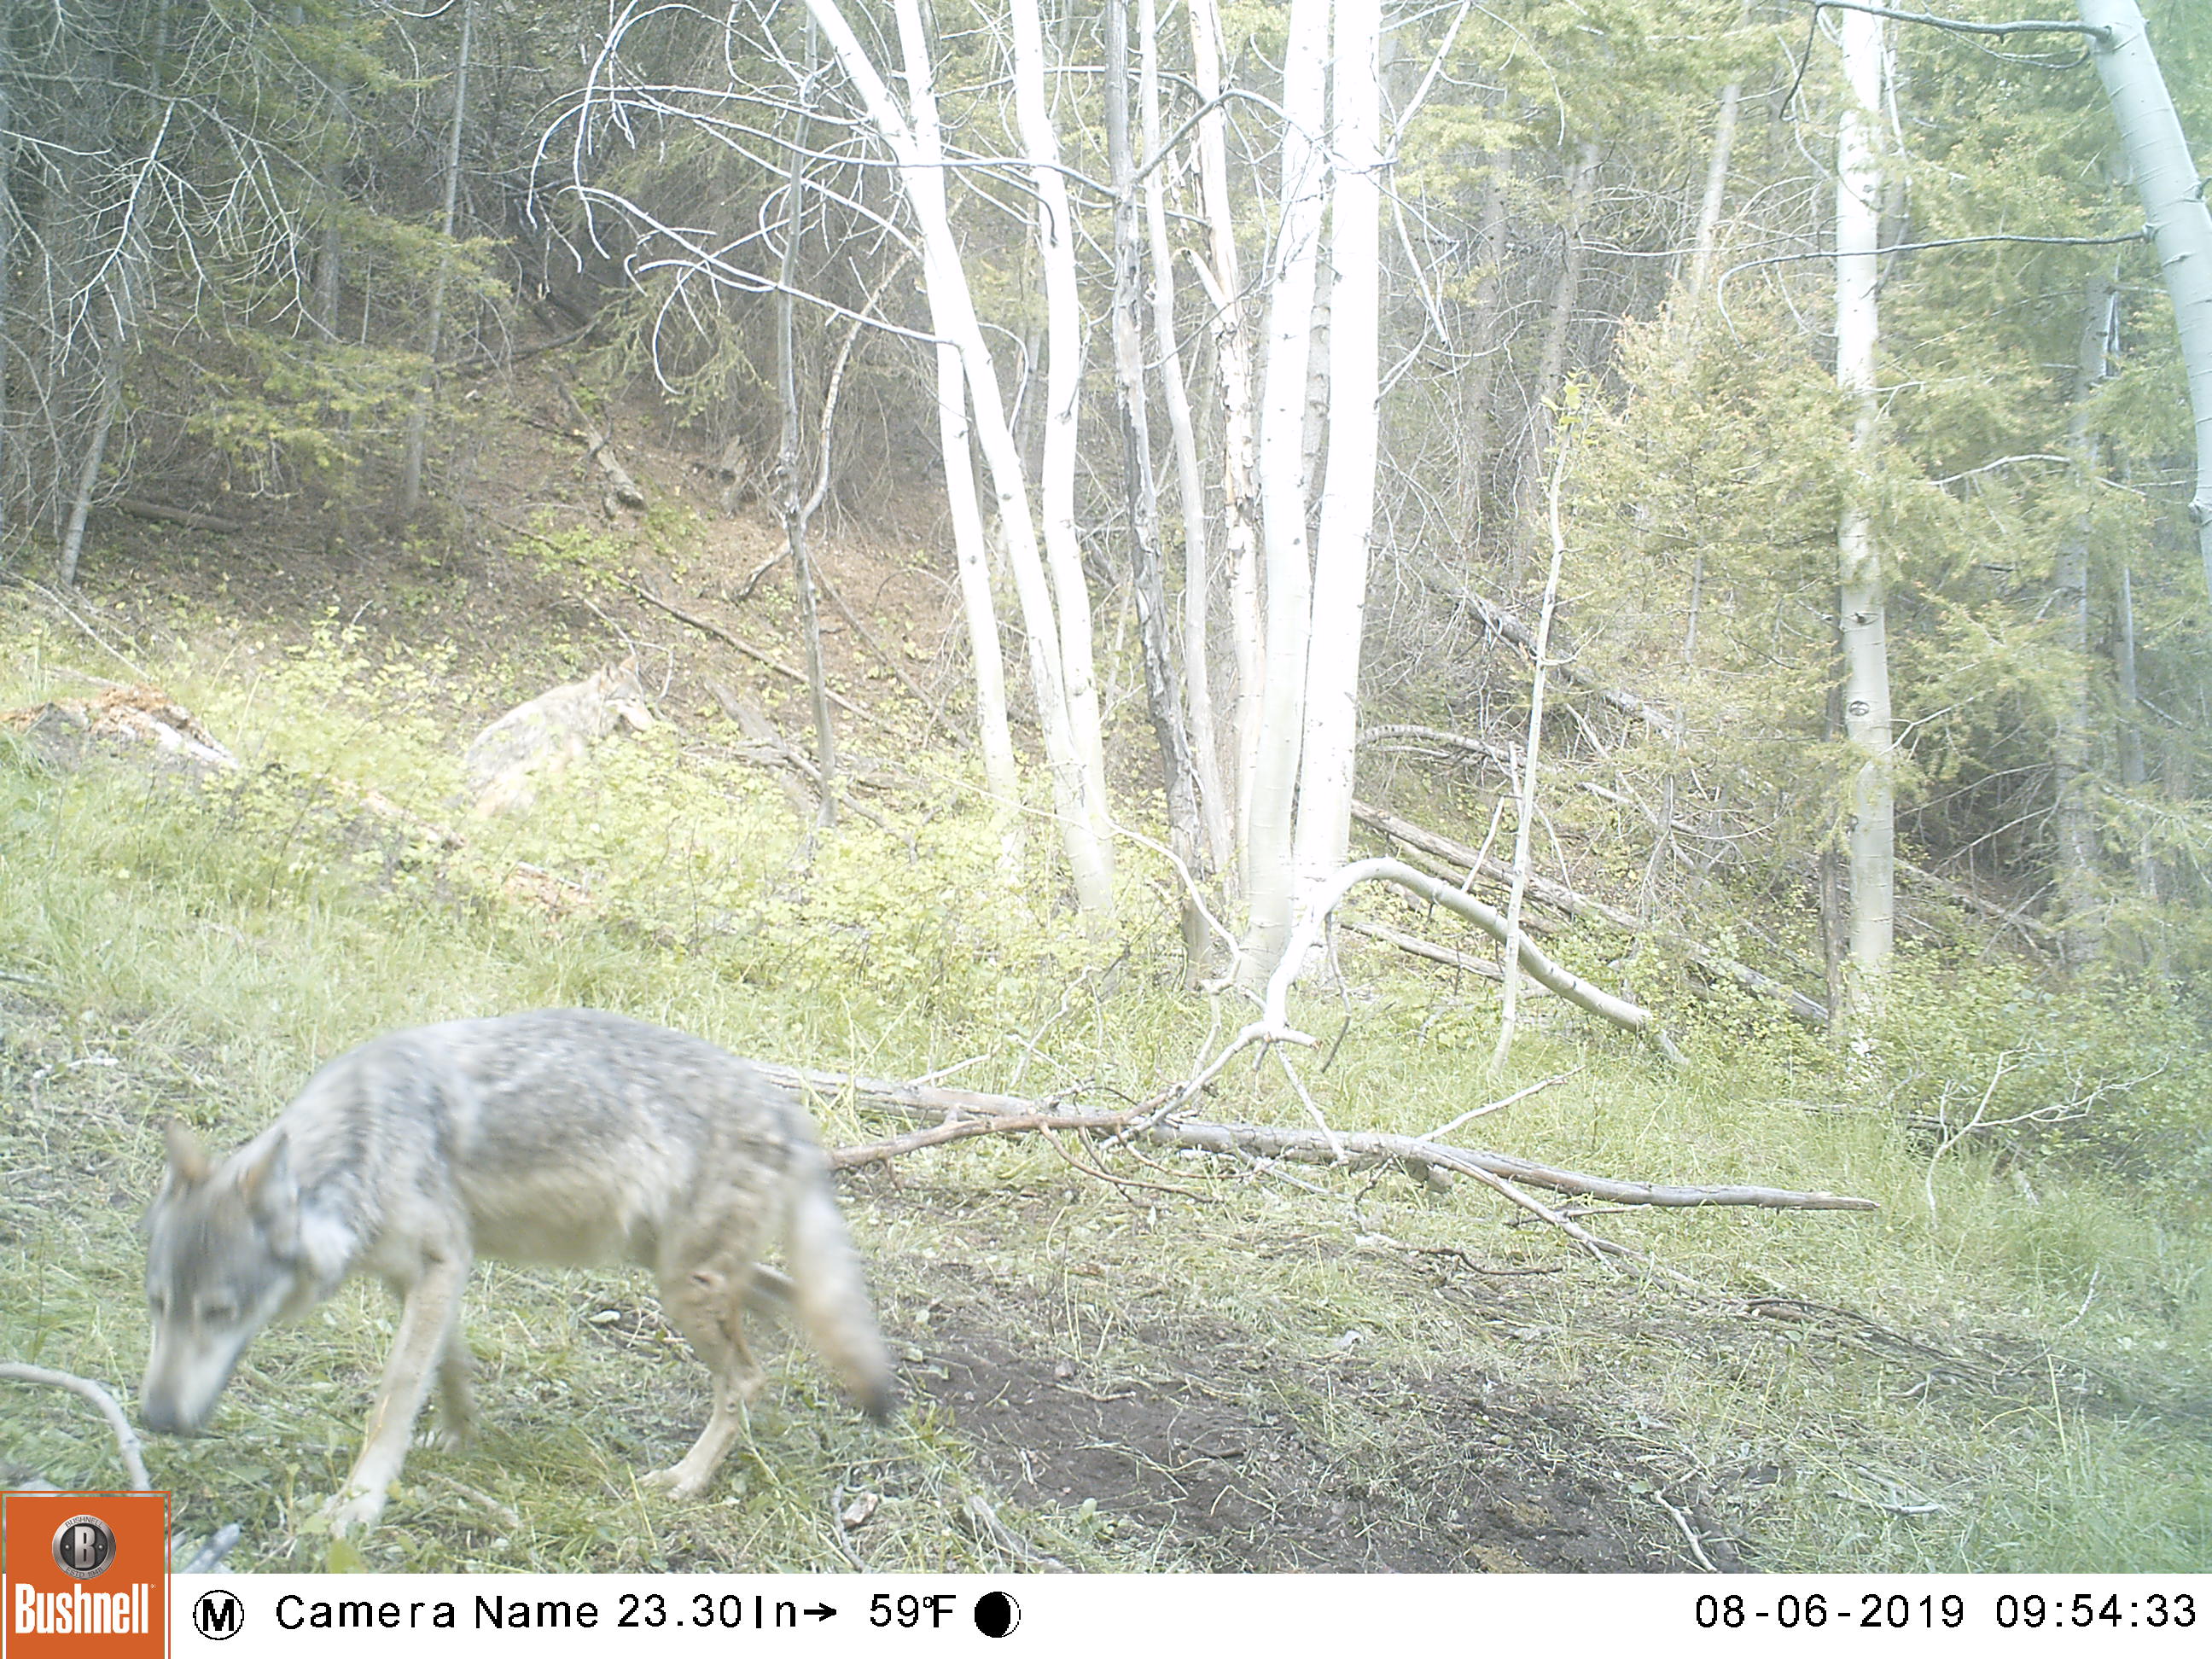 Select to view full image of gray wolves